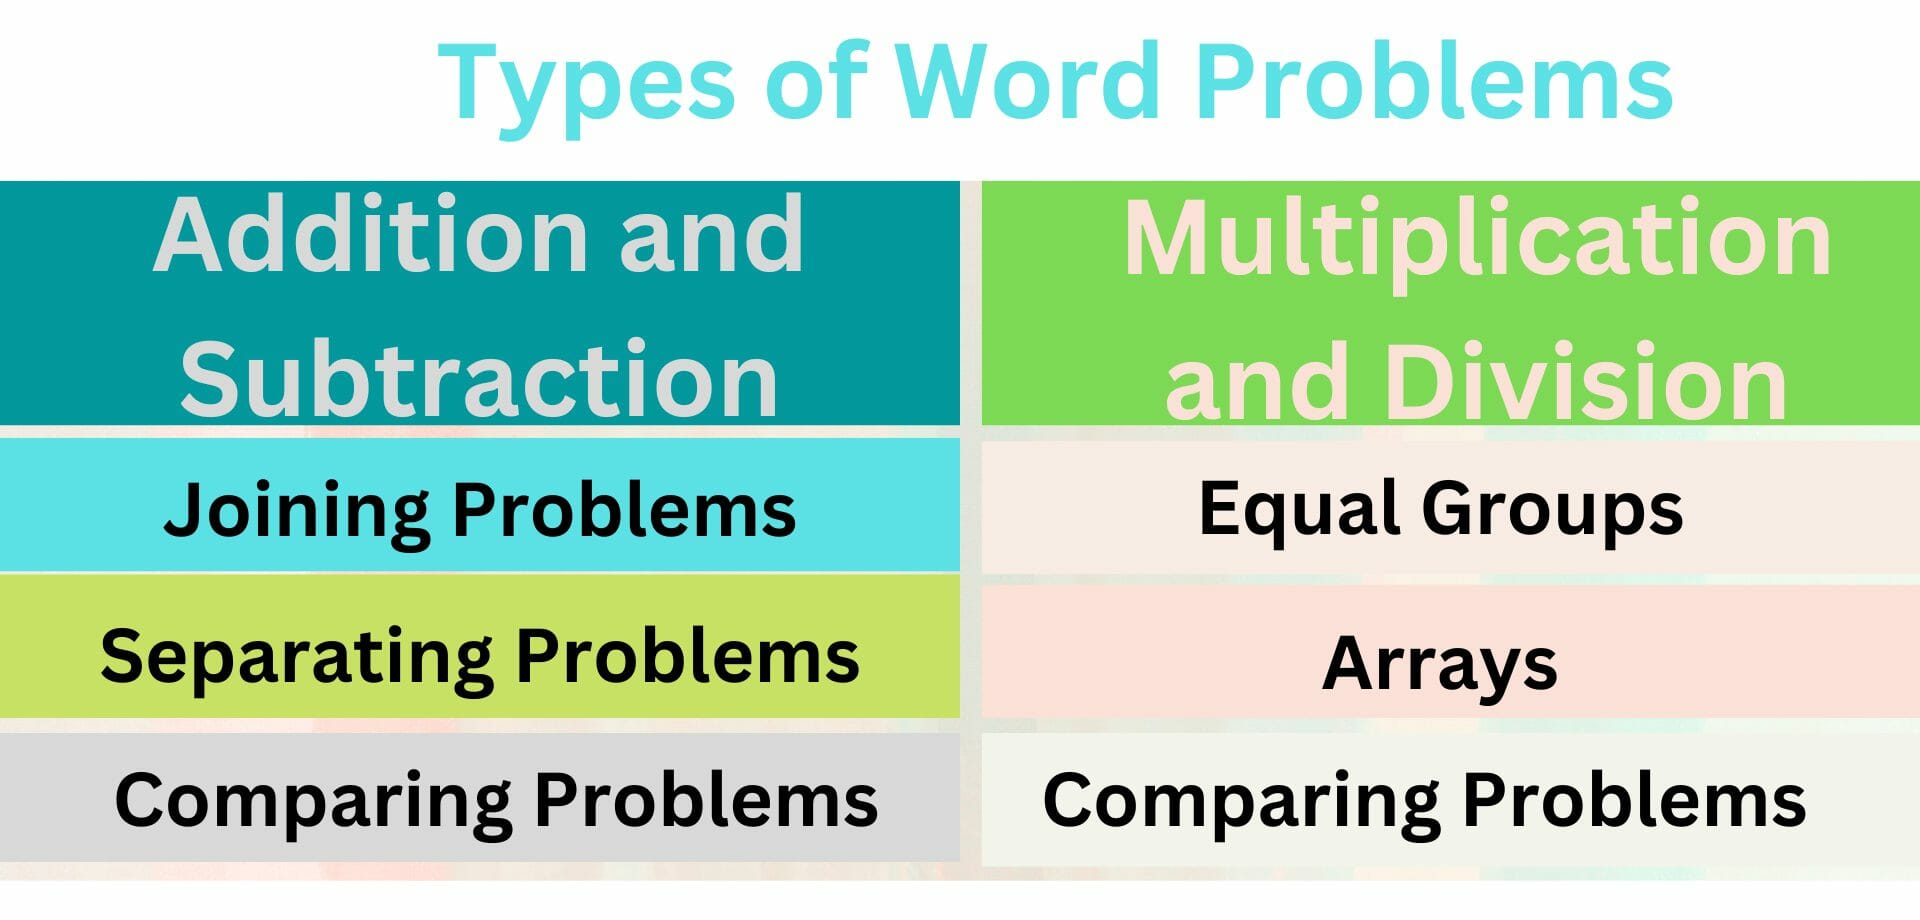 Types of Word Problems